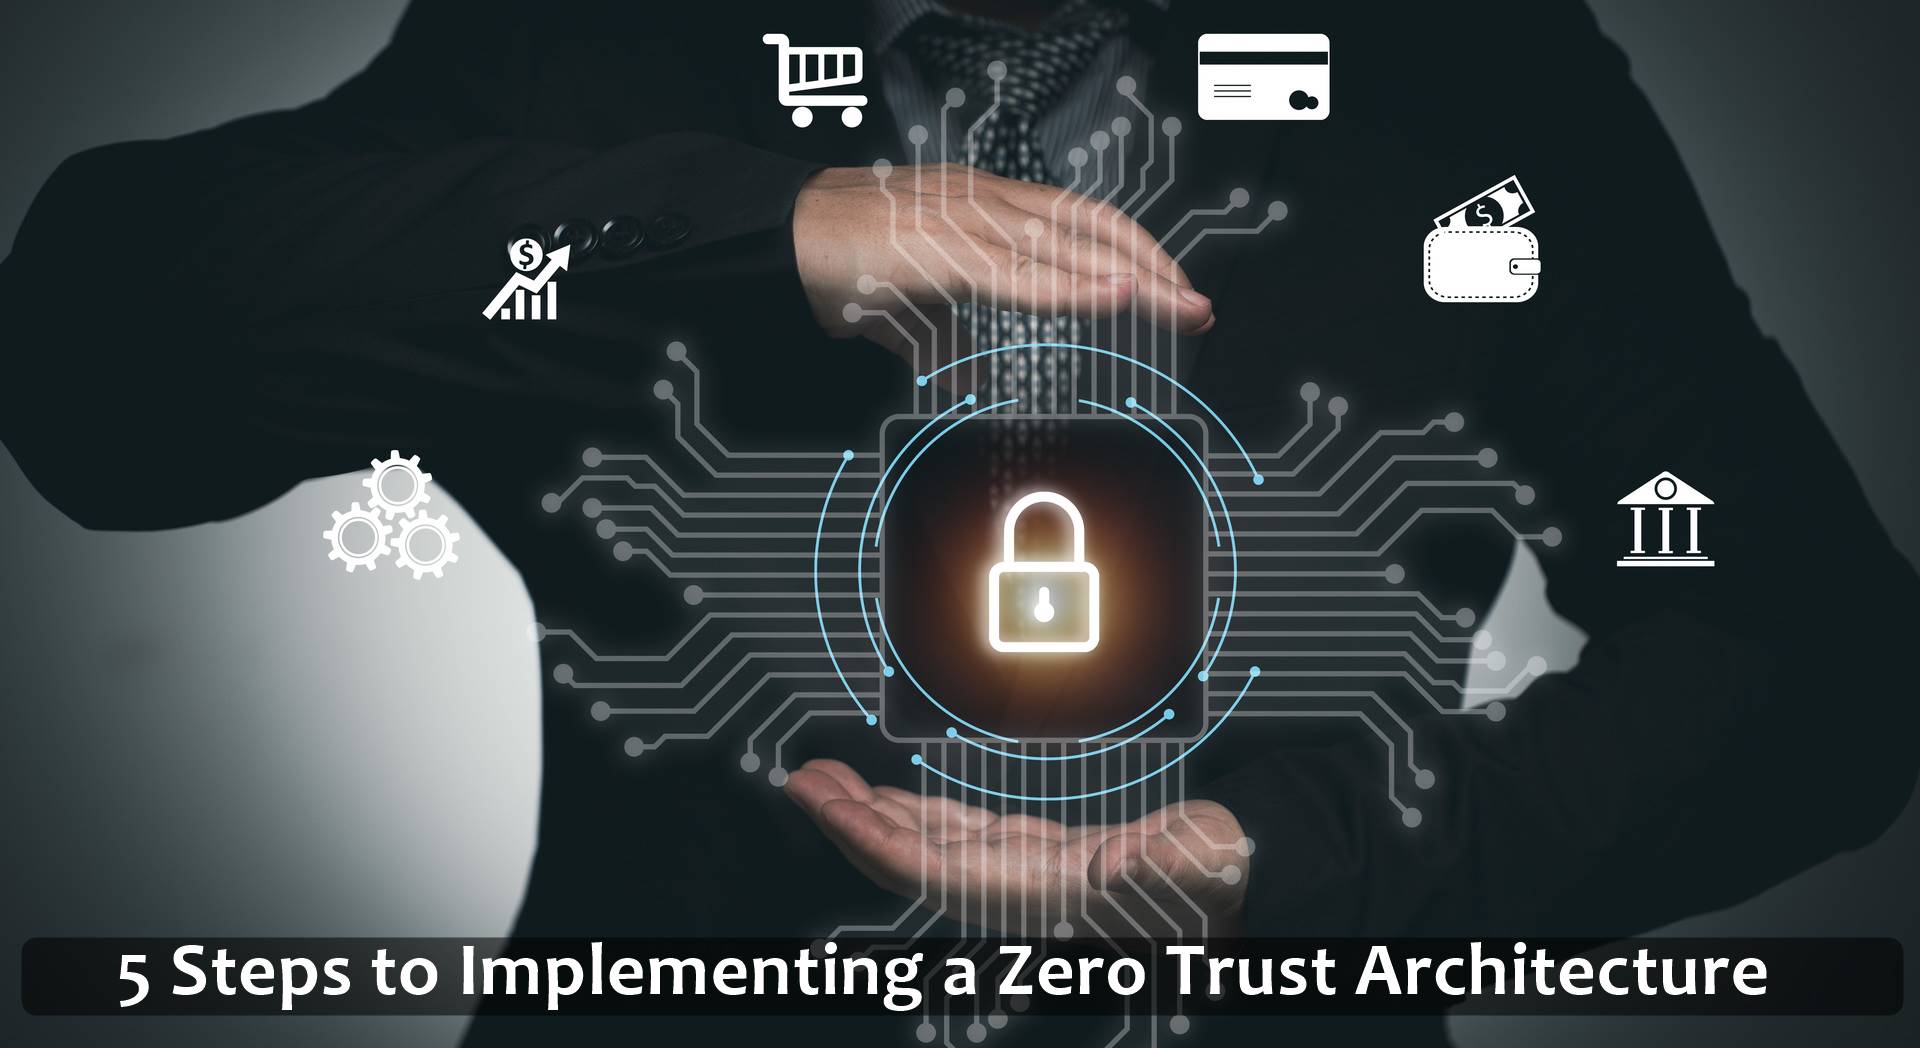 5 Steps to Implementing a Zero Trust Architecture